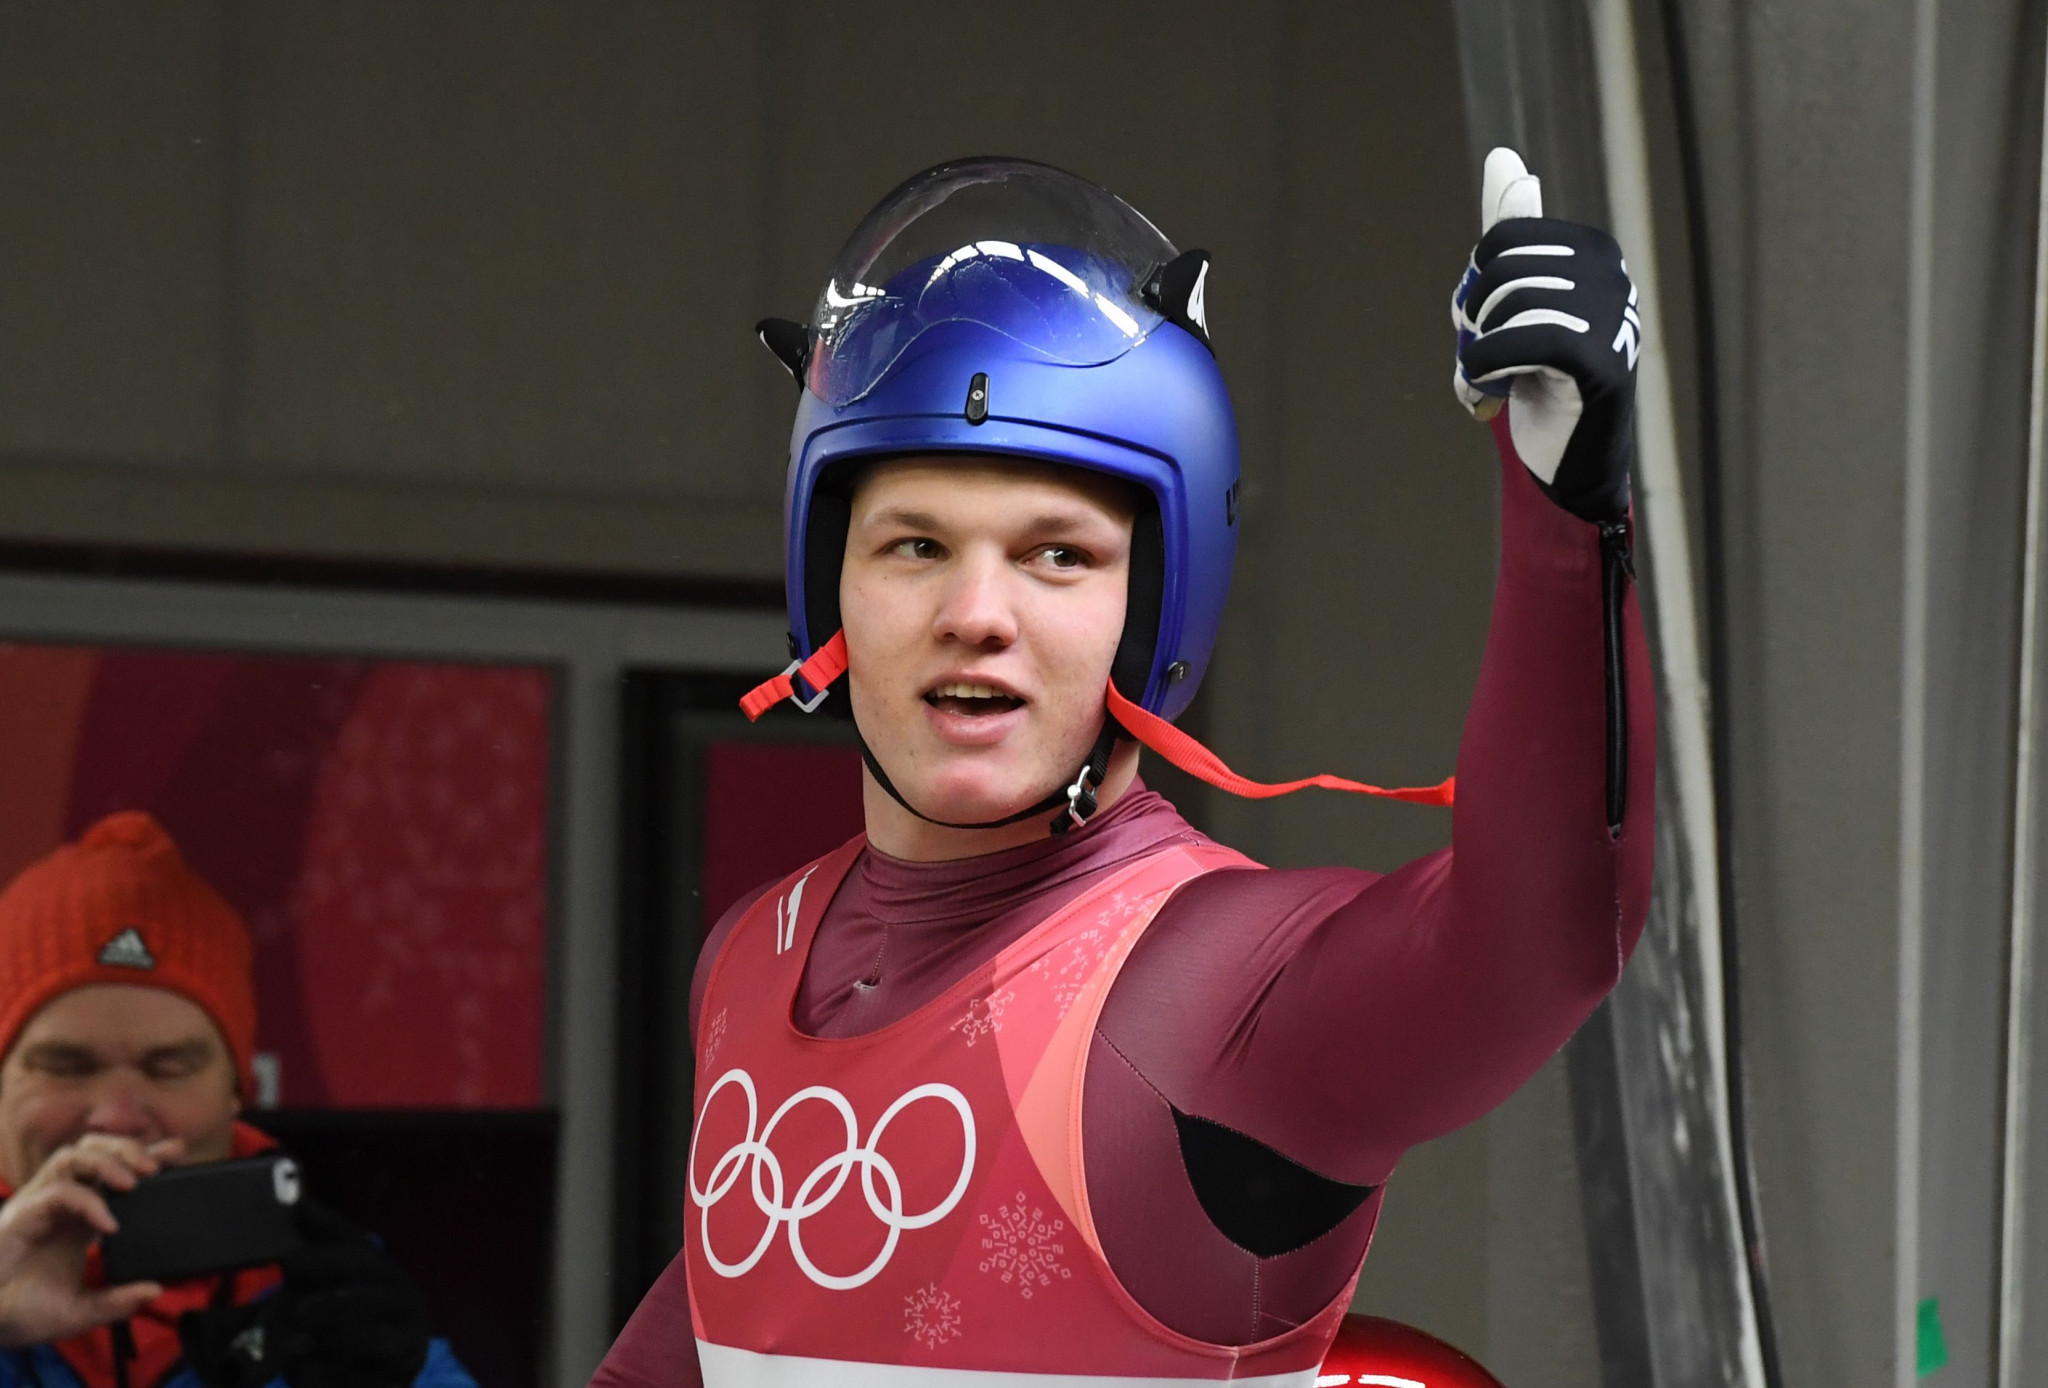 Reigning world champion Roman Repilov earned the men's title at the Russian Luge Championships ©Getty Images